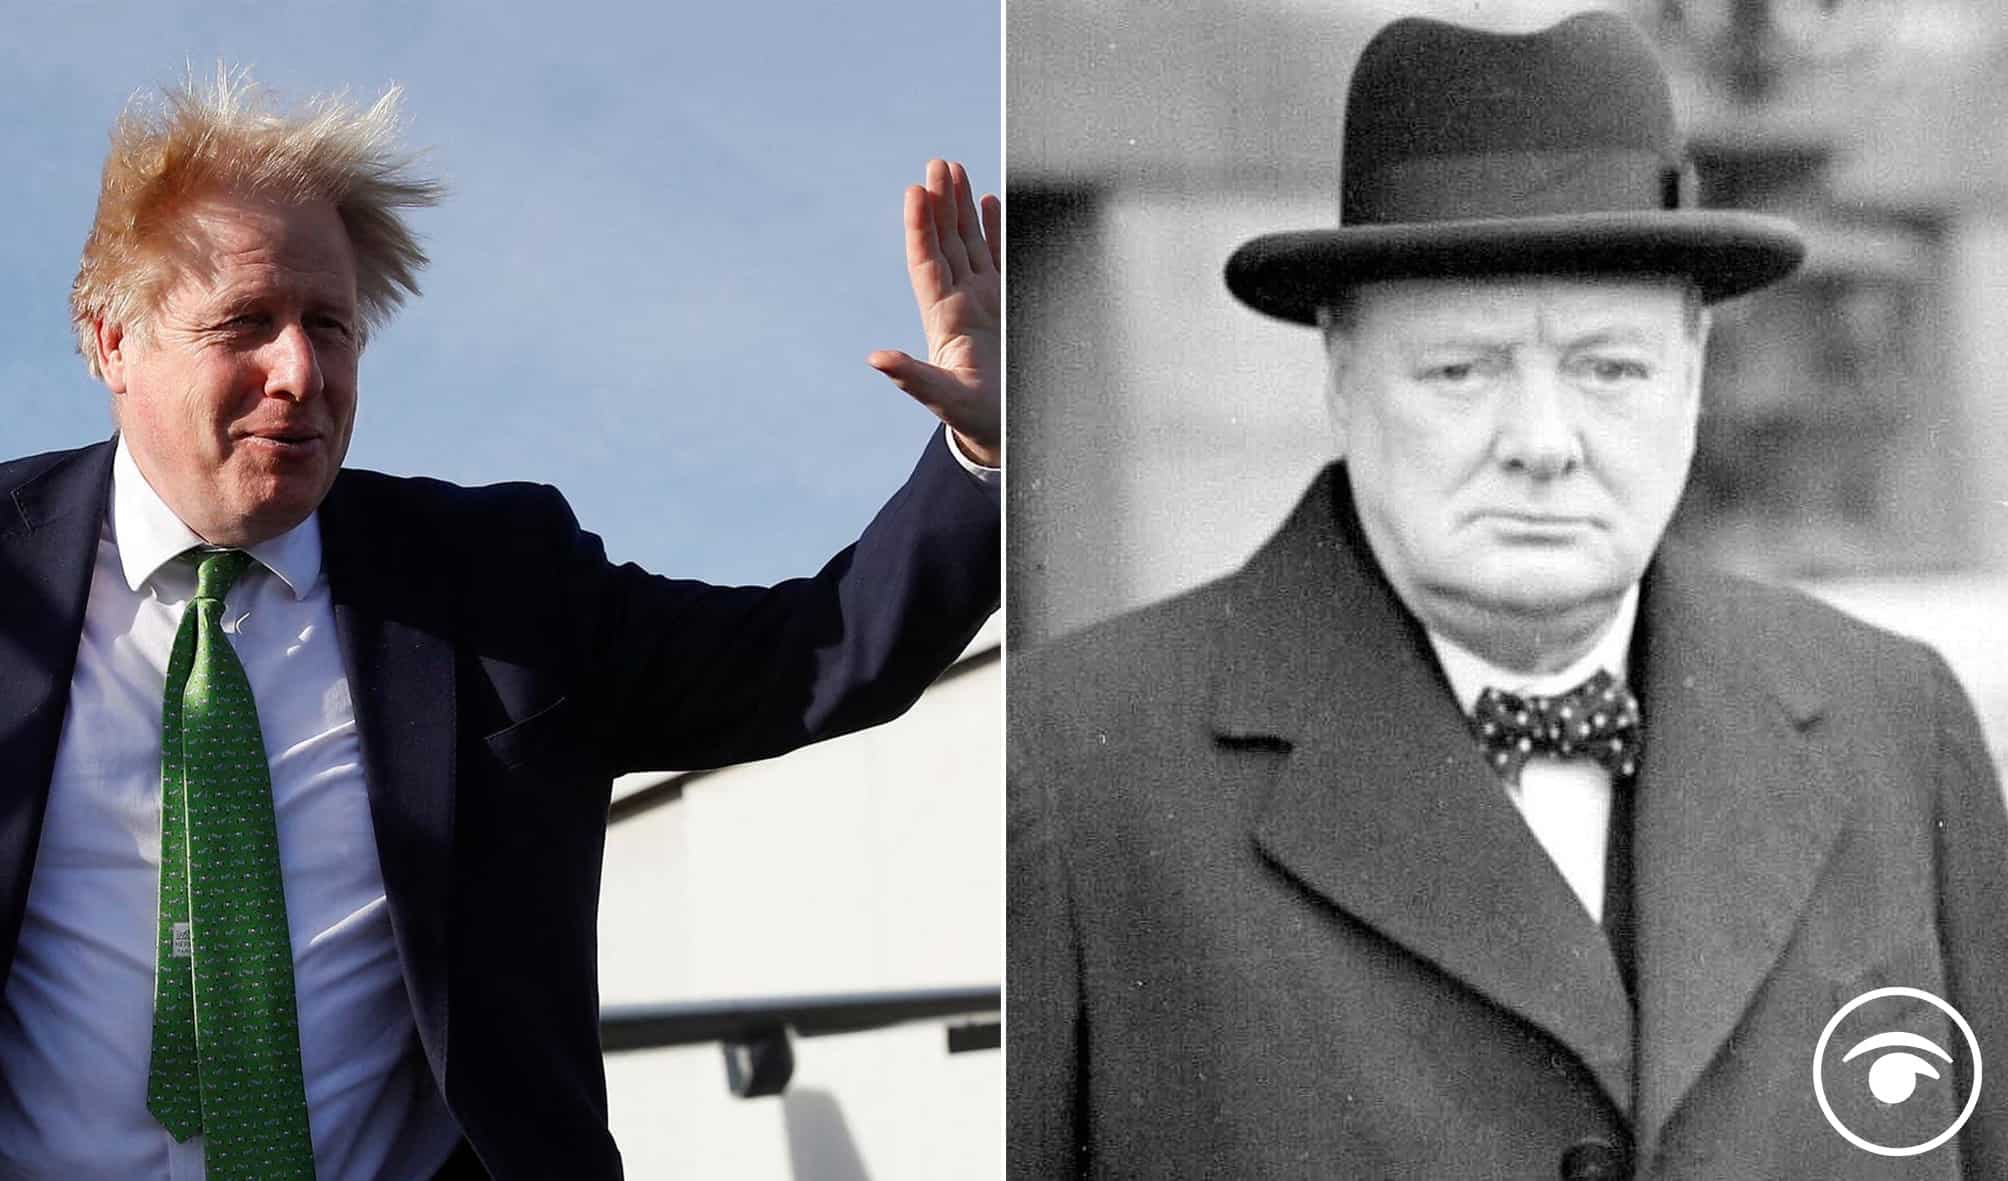 Trying to emulate Churchill? PM says Russia planning ‘biggest war in Europe since 1945’